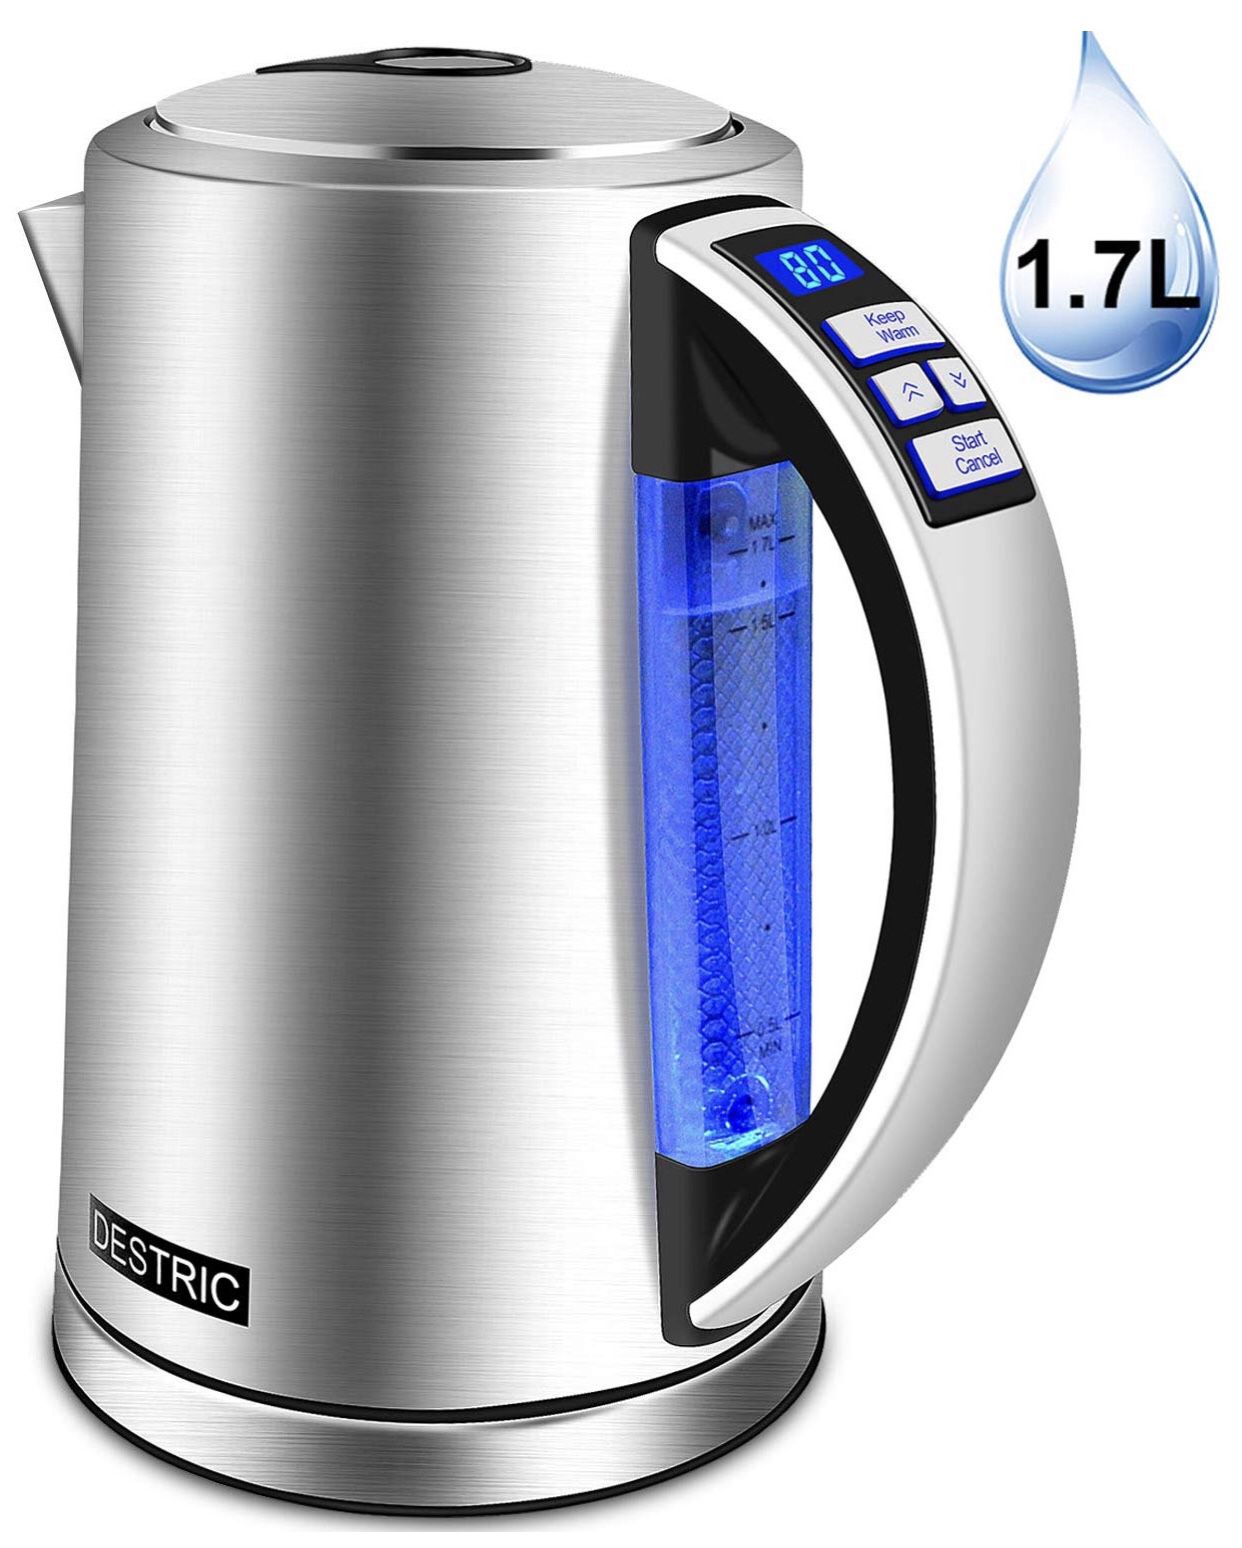 Electric Kettle Temperature Control, DESTRIC 1.7Liter Electric Tea Kettle with Keep Warm Function, 5 LED Color Change, Automatic Shut off & Boil-Dry